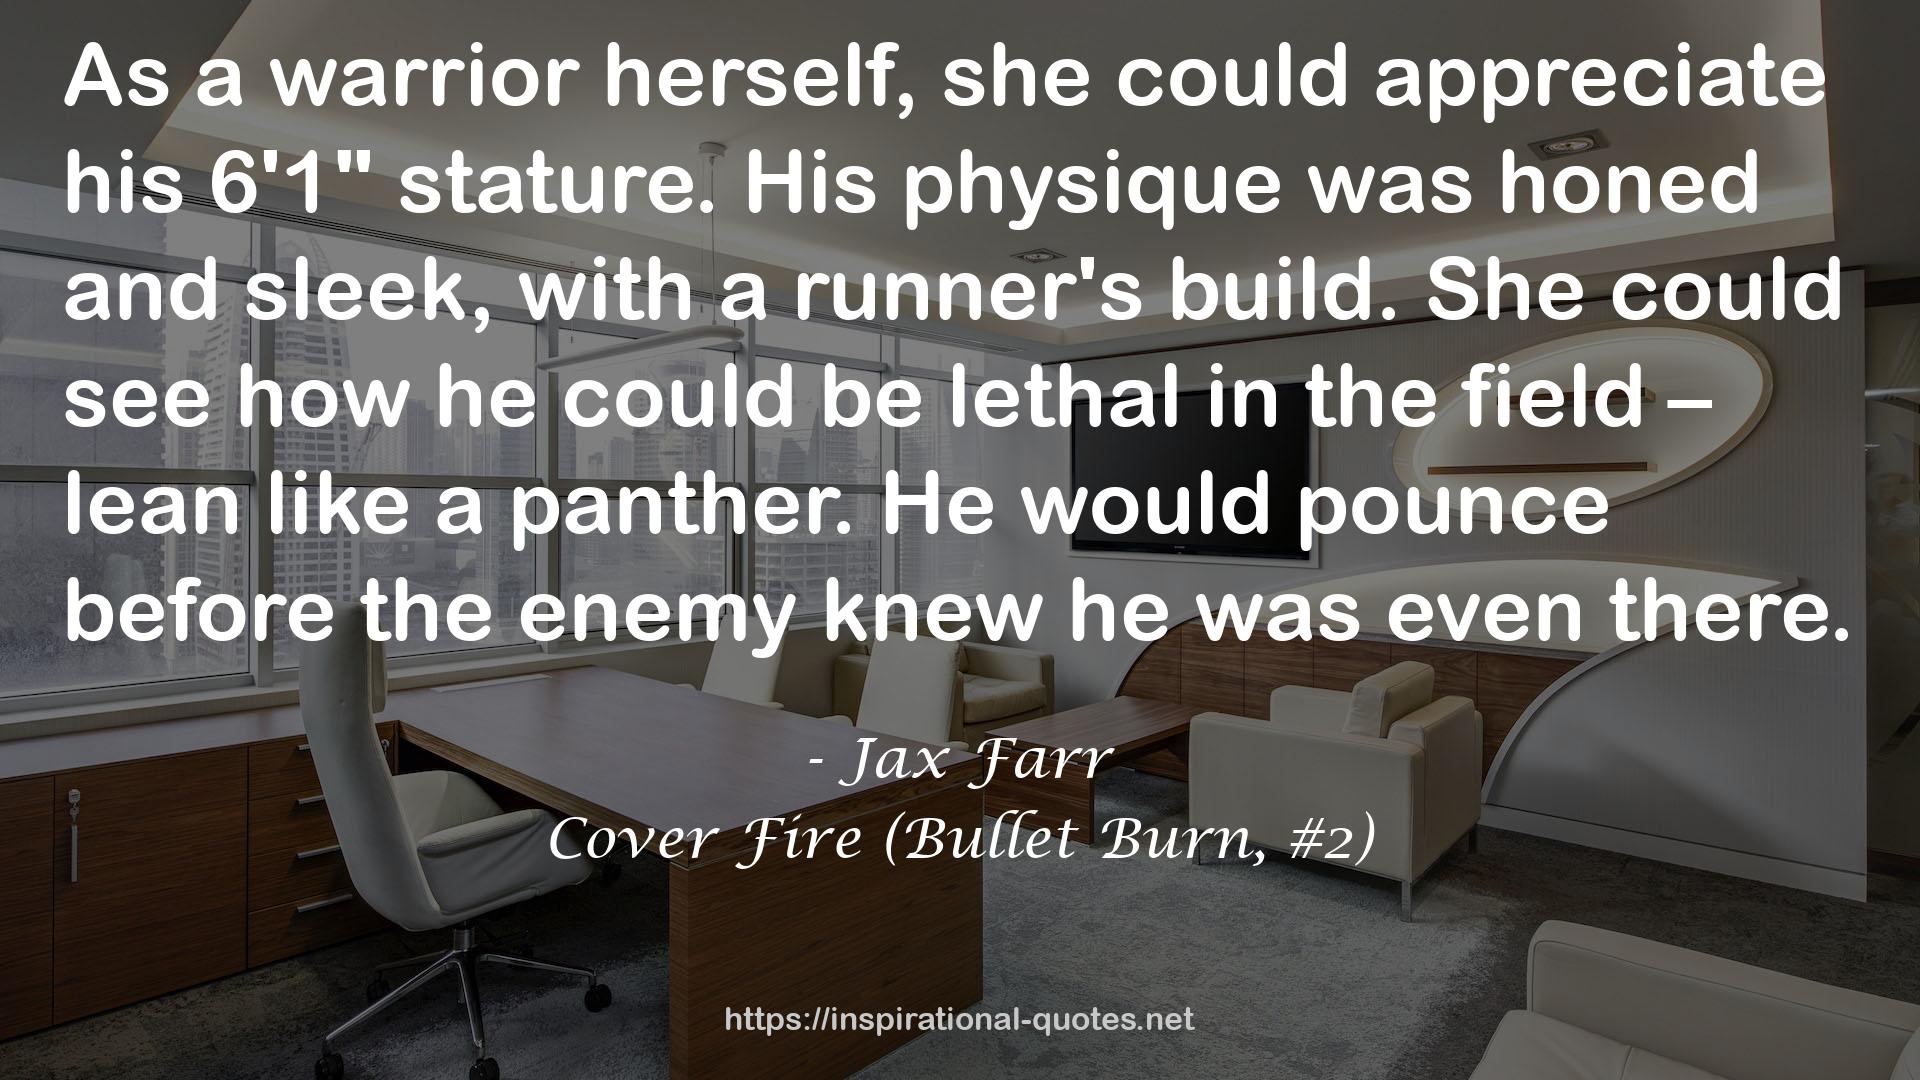 Cover Fire (Bullet Burn, #2) QUOTES